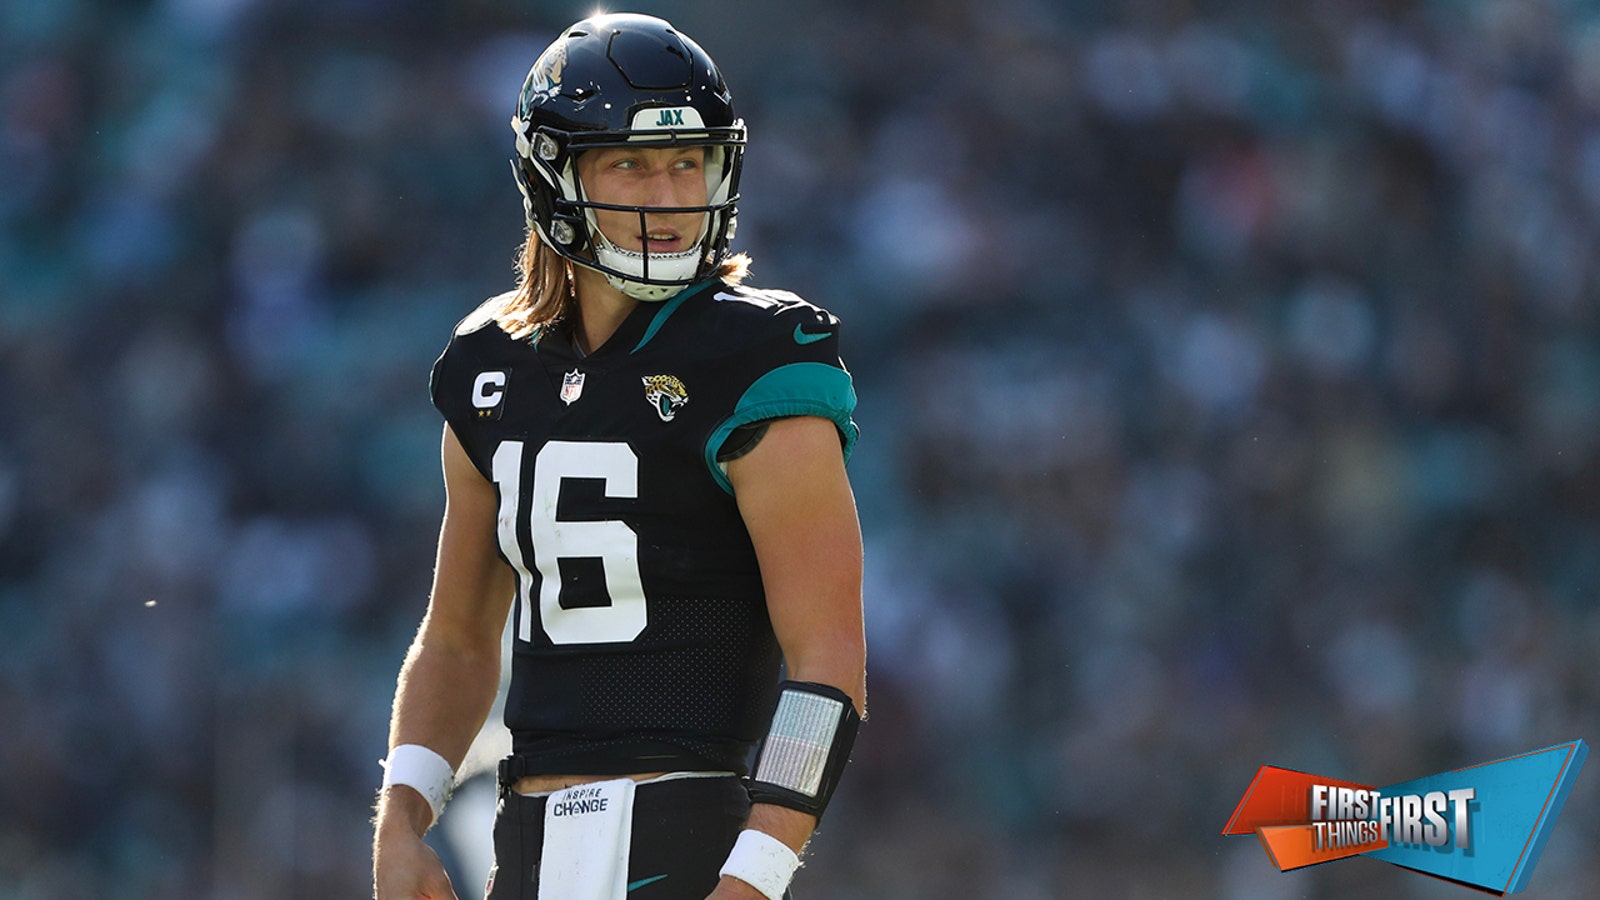 Trevor Lawrence makes his playoff debut against the Chargers on Super Wild Card Weekend 